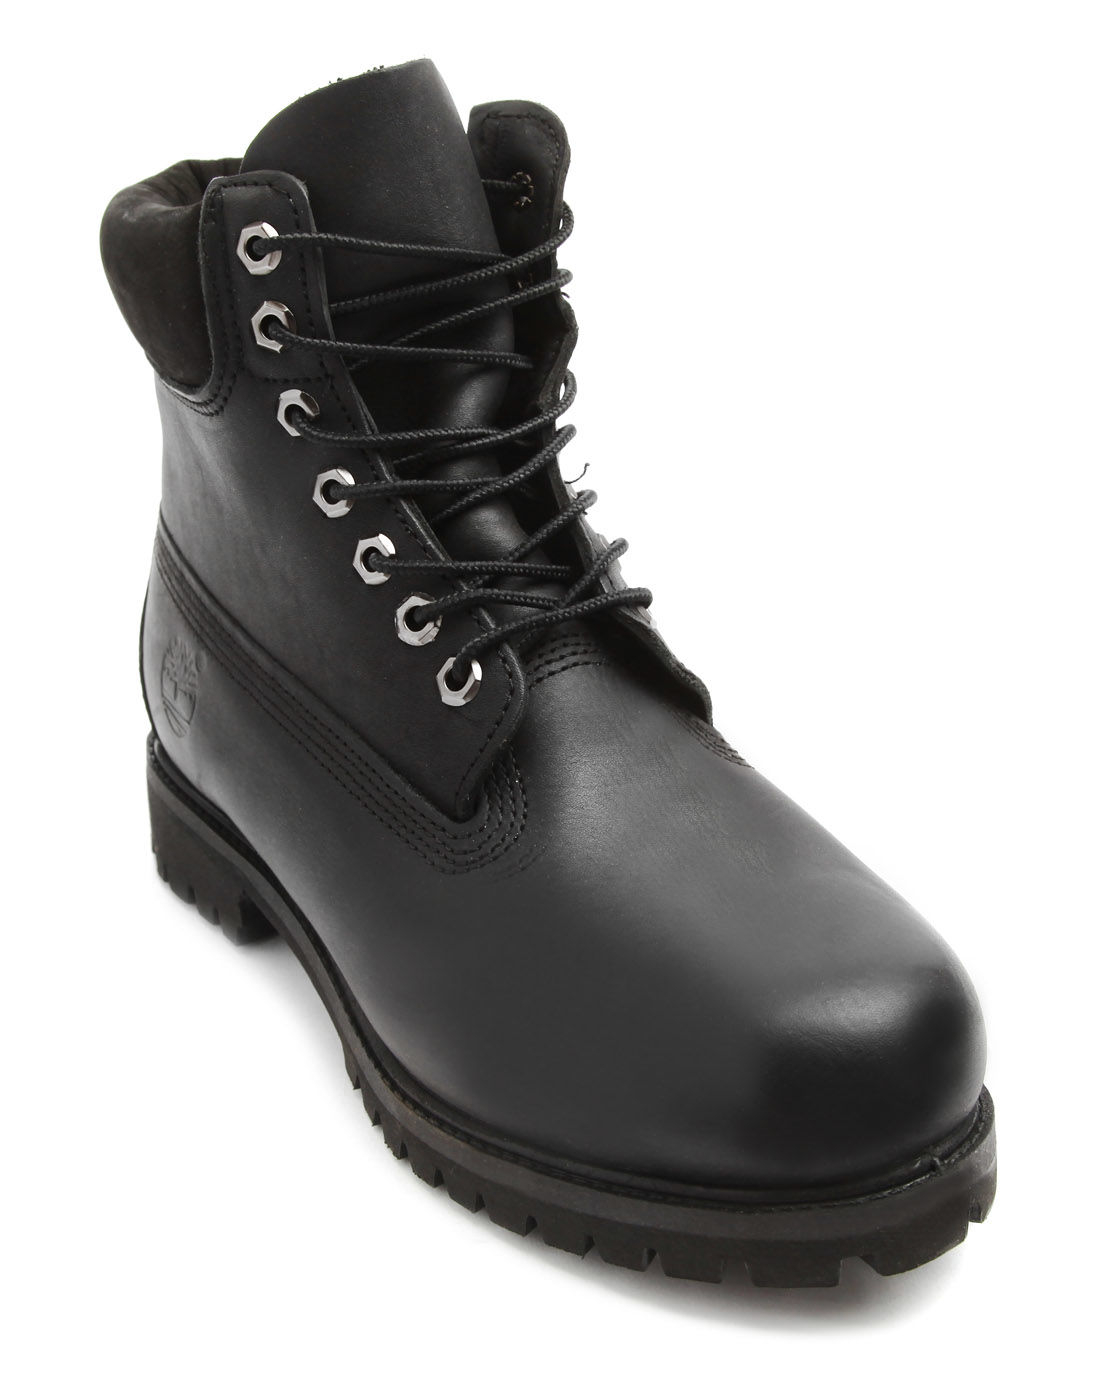 timberland-black-6-inch-premium-black-boots-product-1-24448154-0-447860735-normal.jpeg